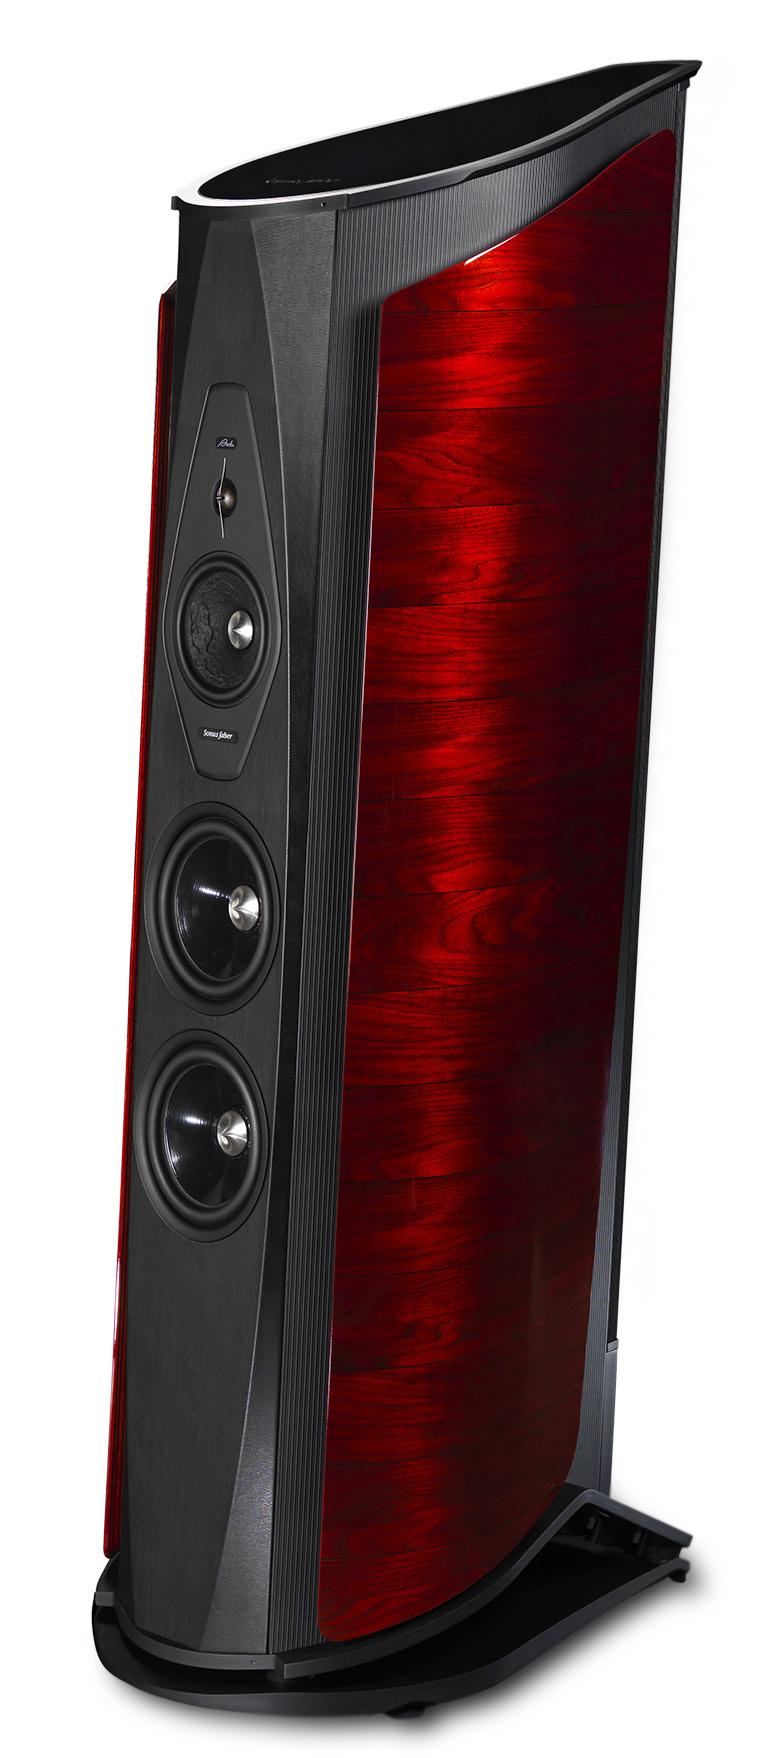 TONEAudio 01 This past year has been an intriguing one, with excellent products throughout the price spectrum.